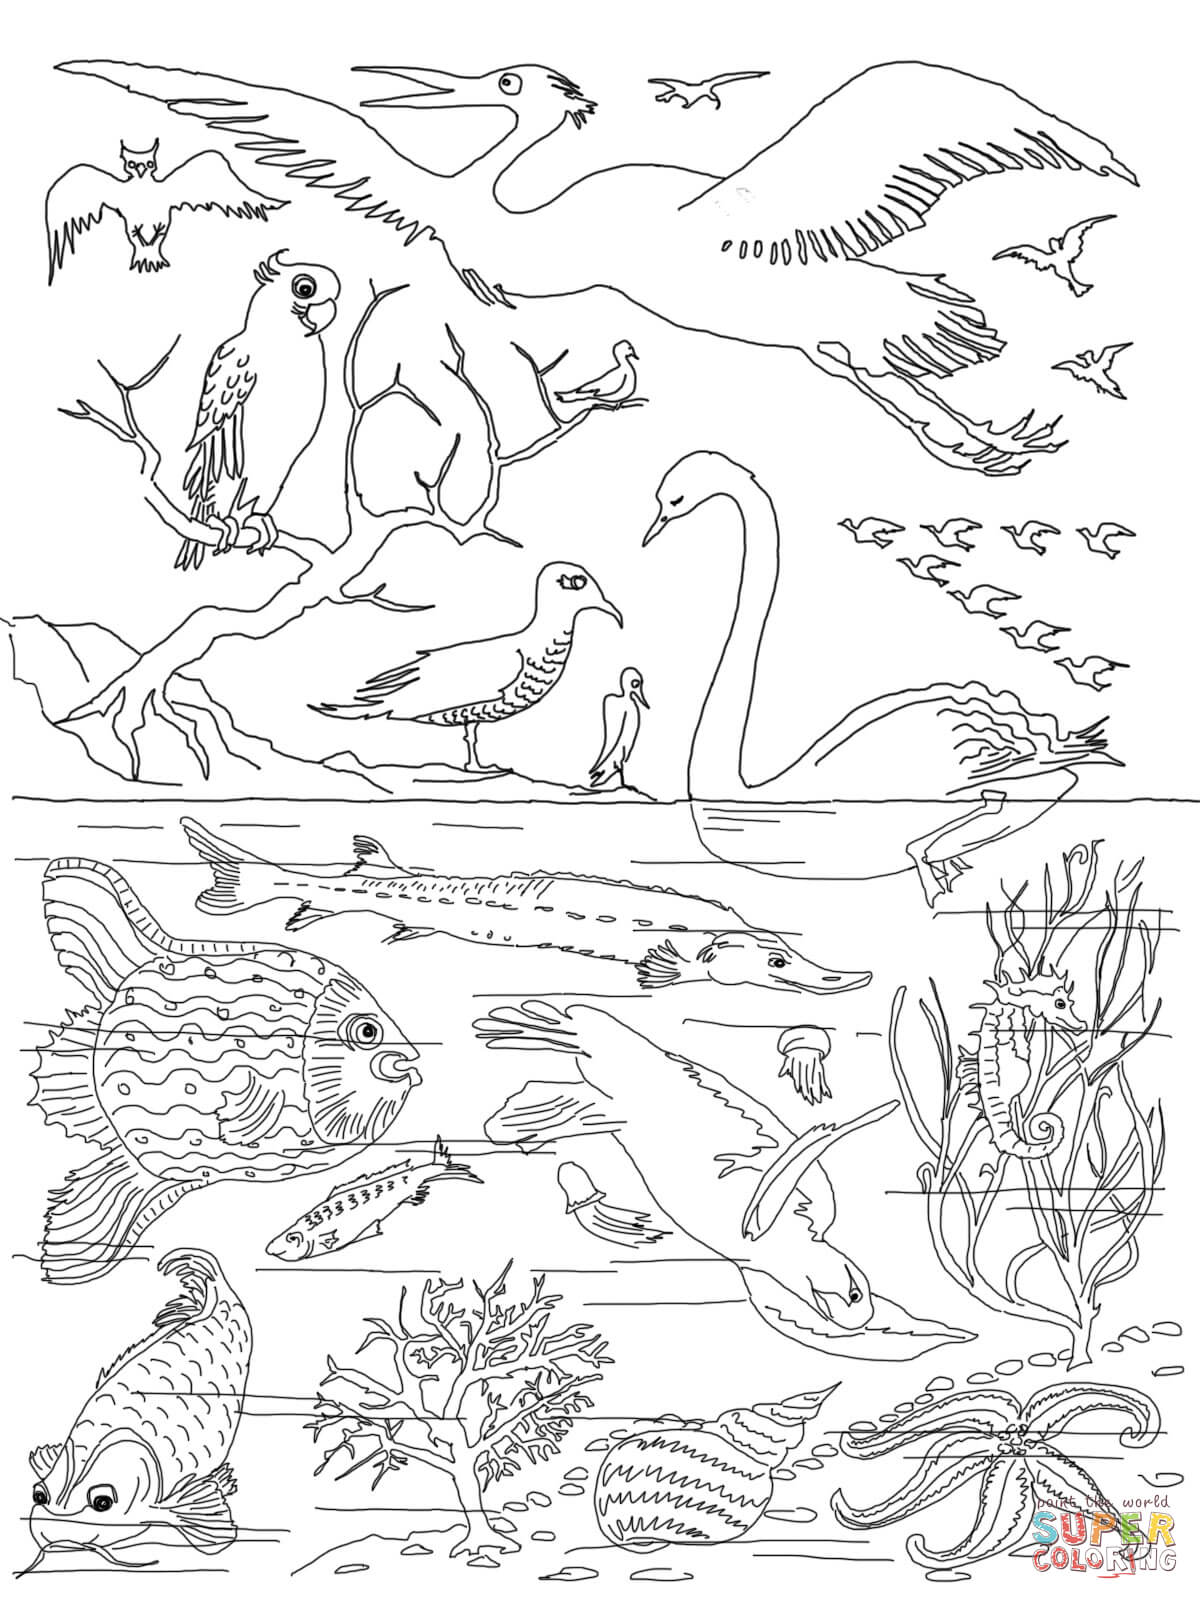 Creation Story coloring pages | Free Coloring Pages